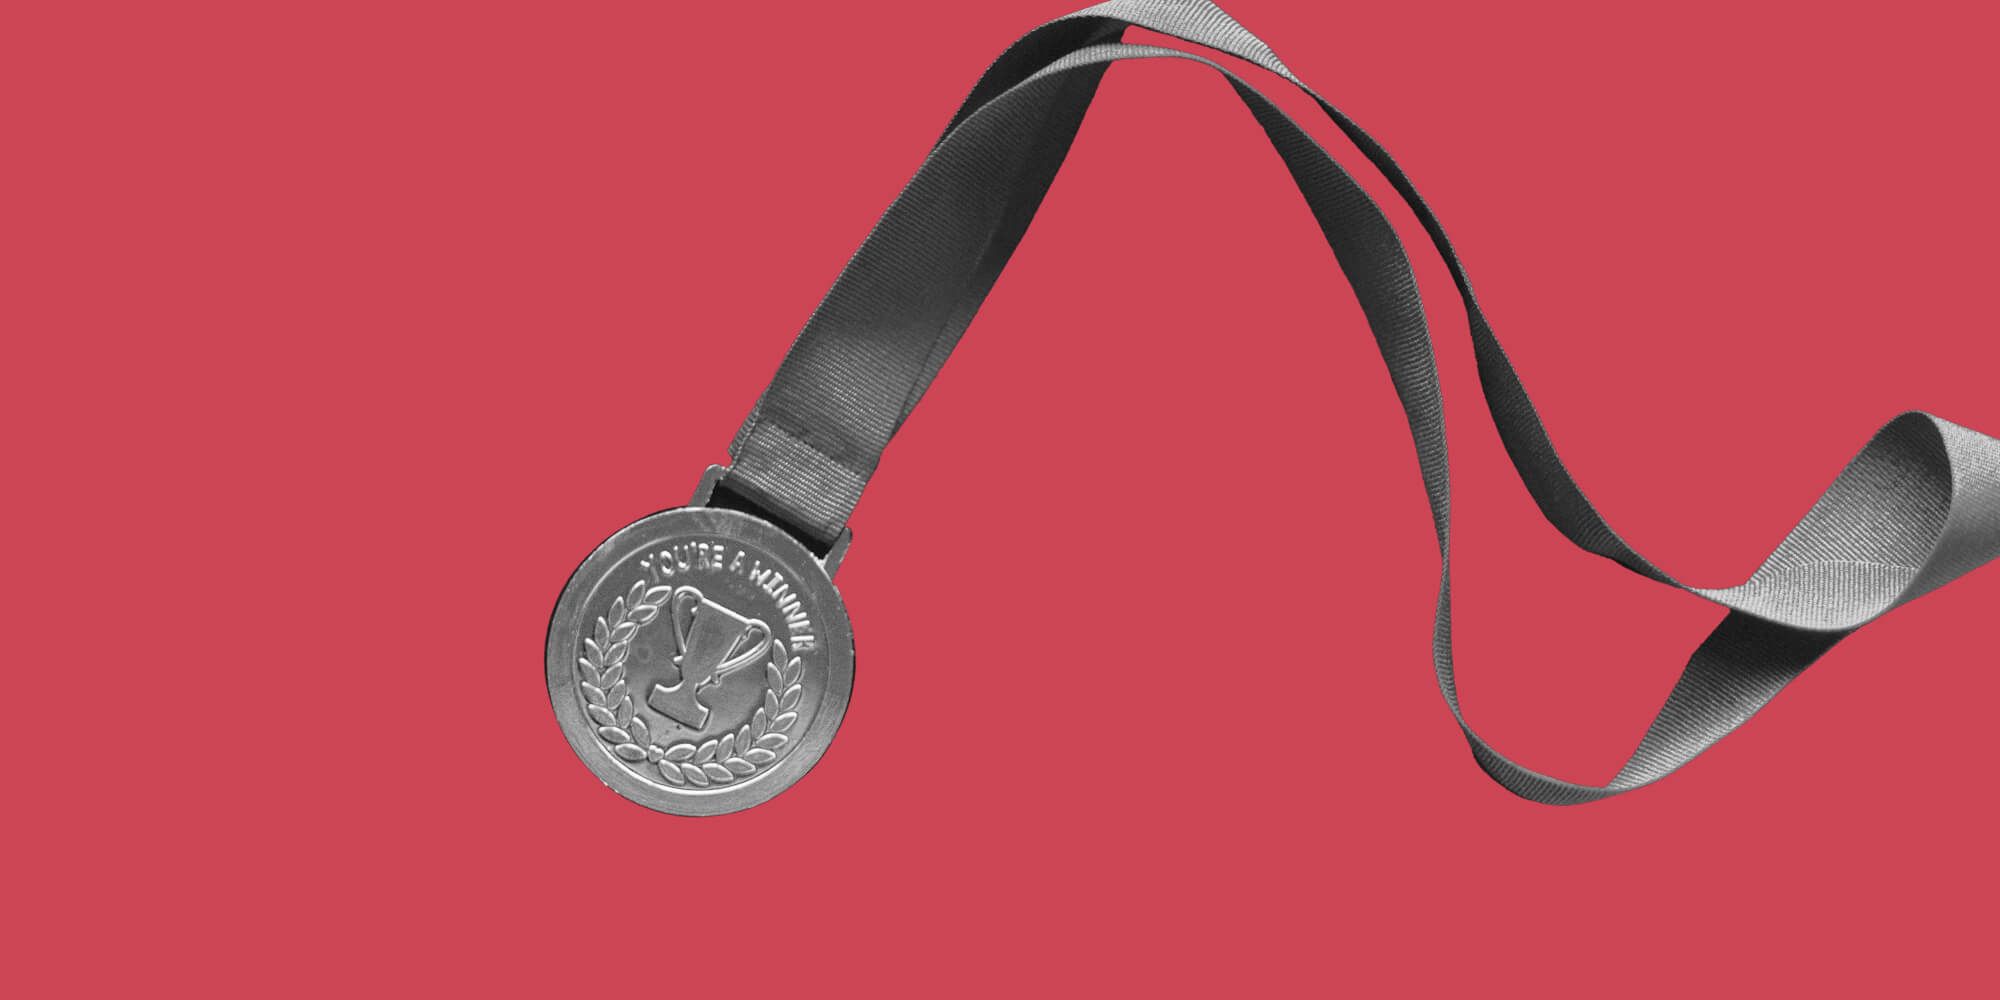 A gold medal on a red background. Achieving a new level of sobriety